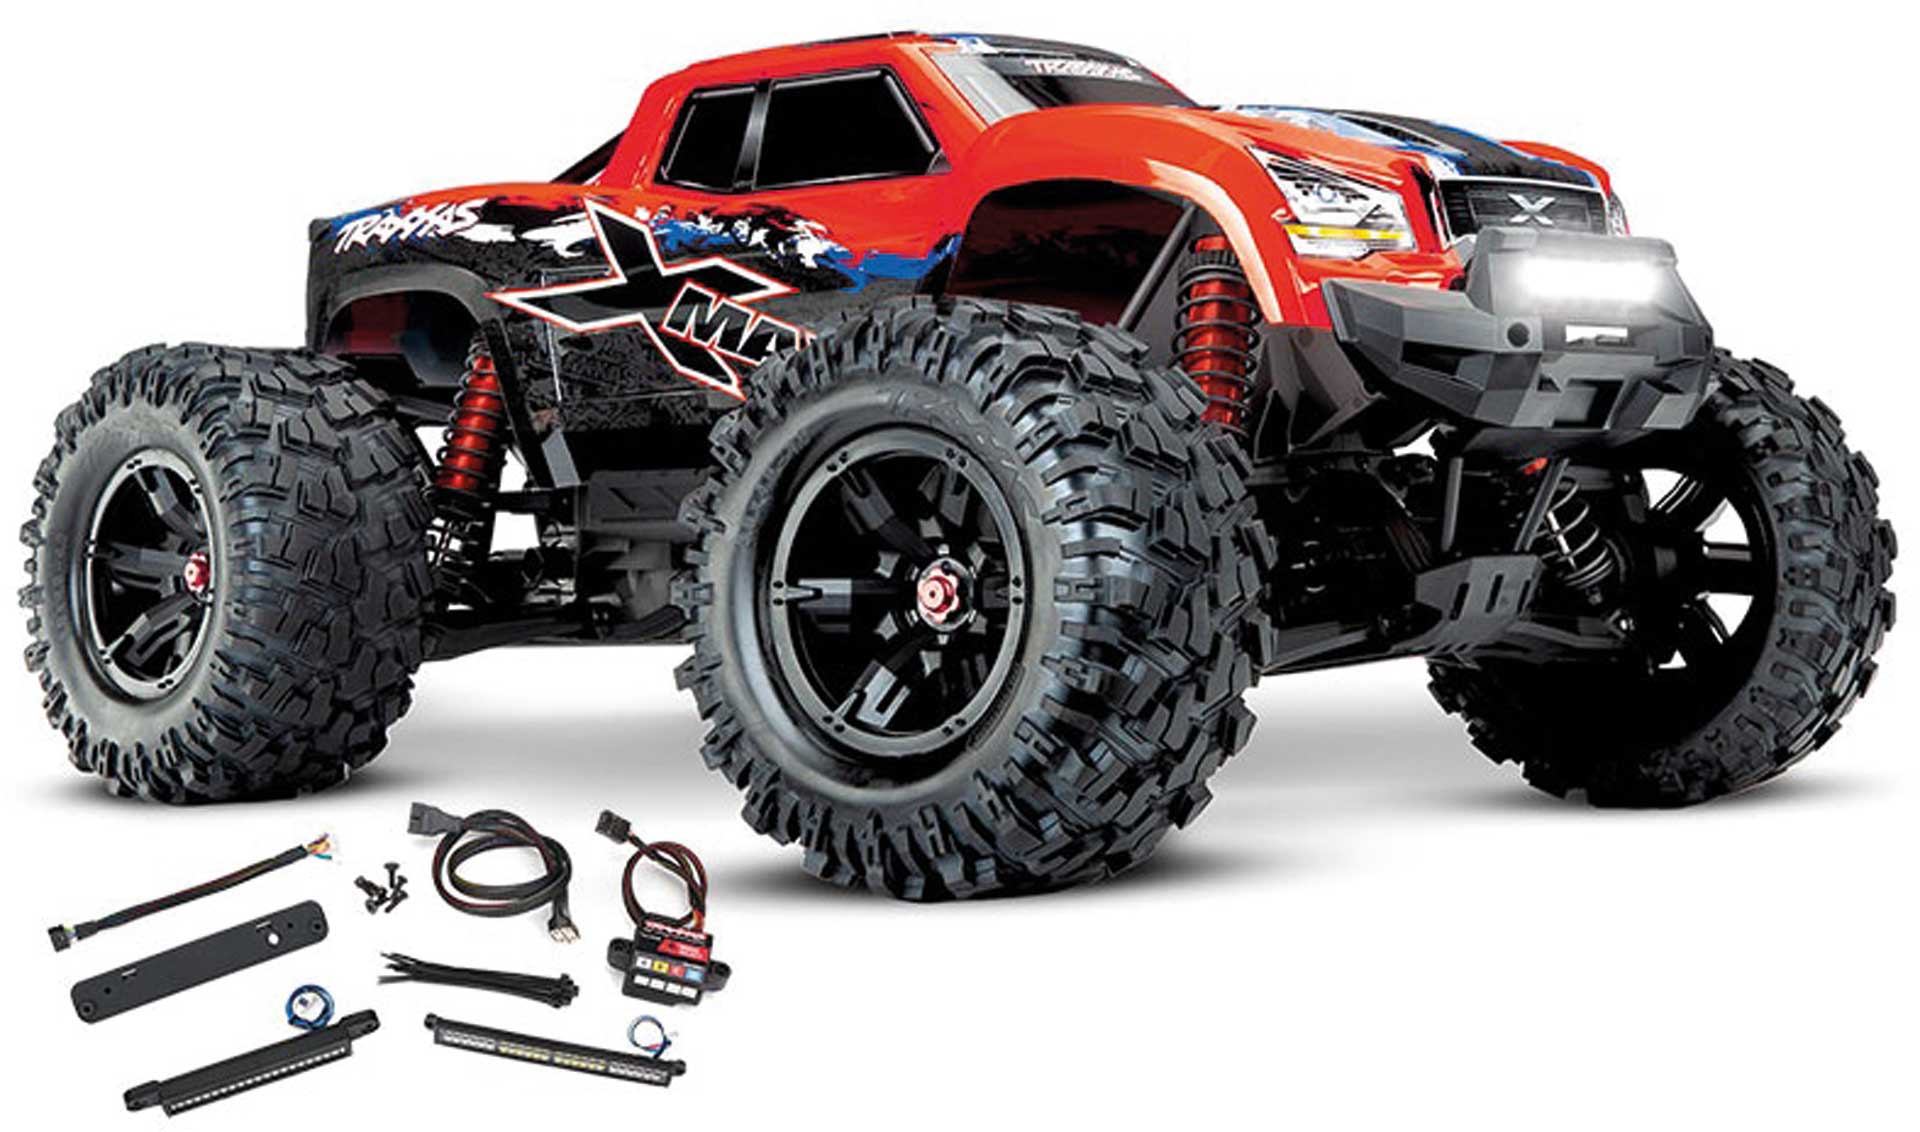 TRAXXAS X-MAXX 4X4 VXL ROT-X 1/7 MONSTER-TRUCK RTR without Battery and Charger